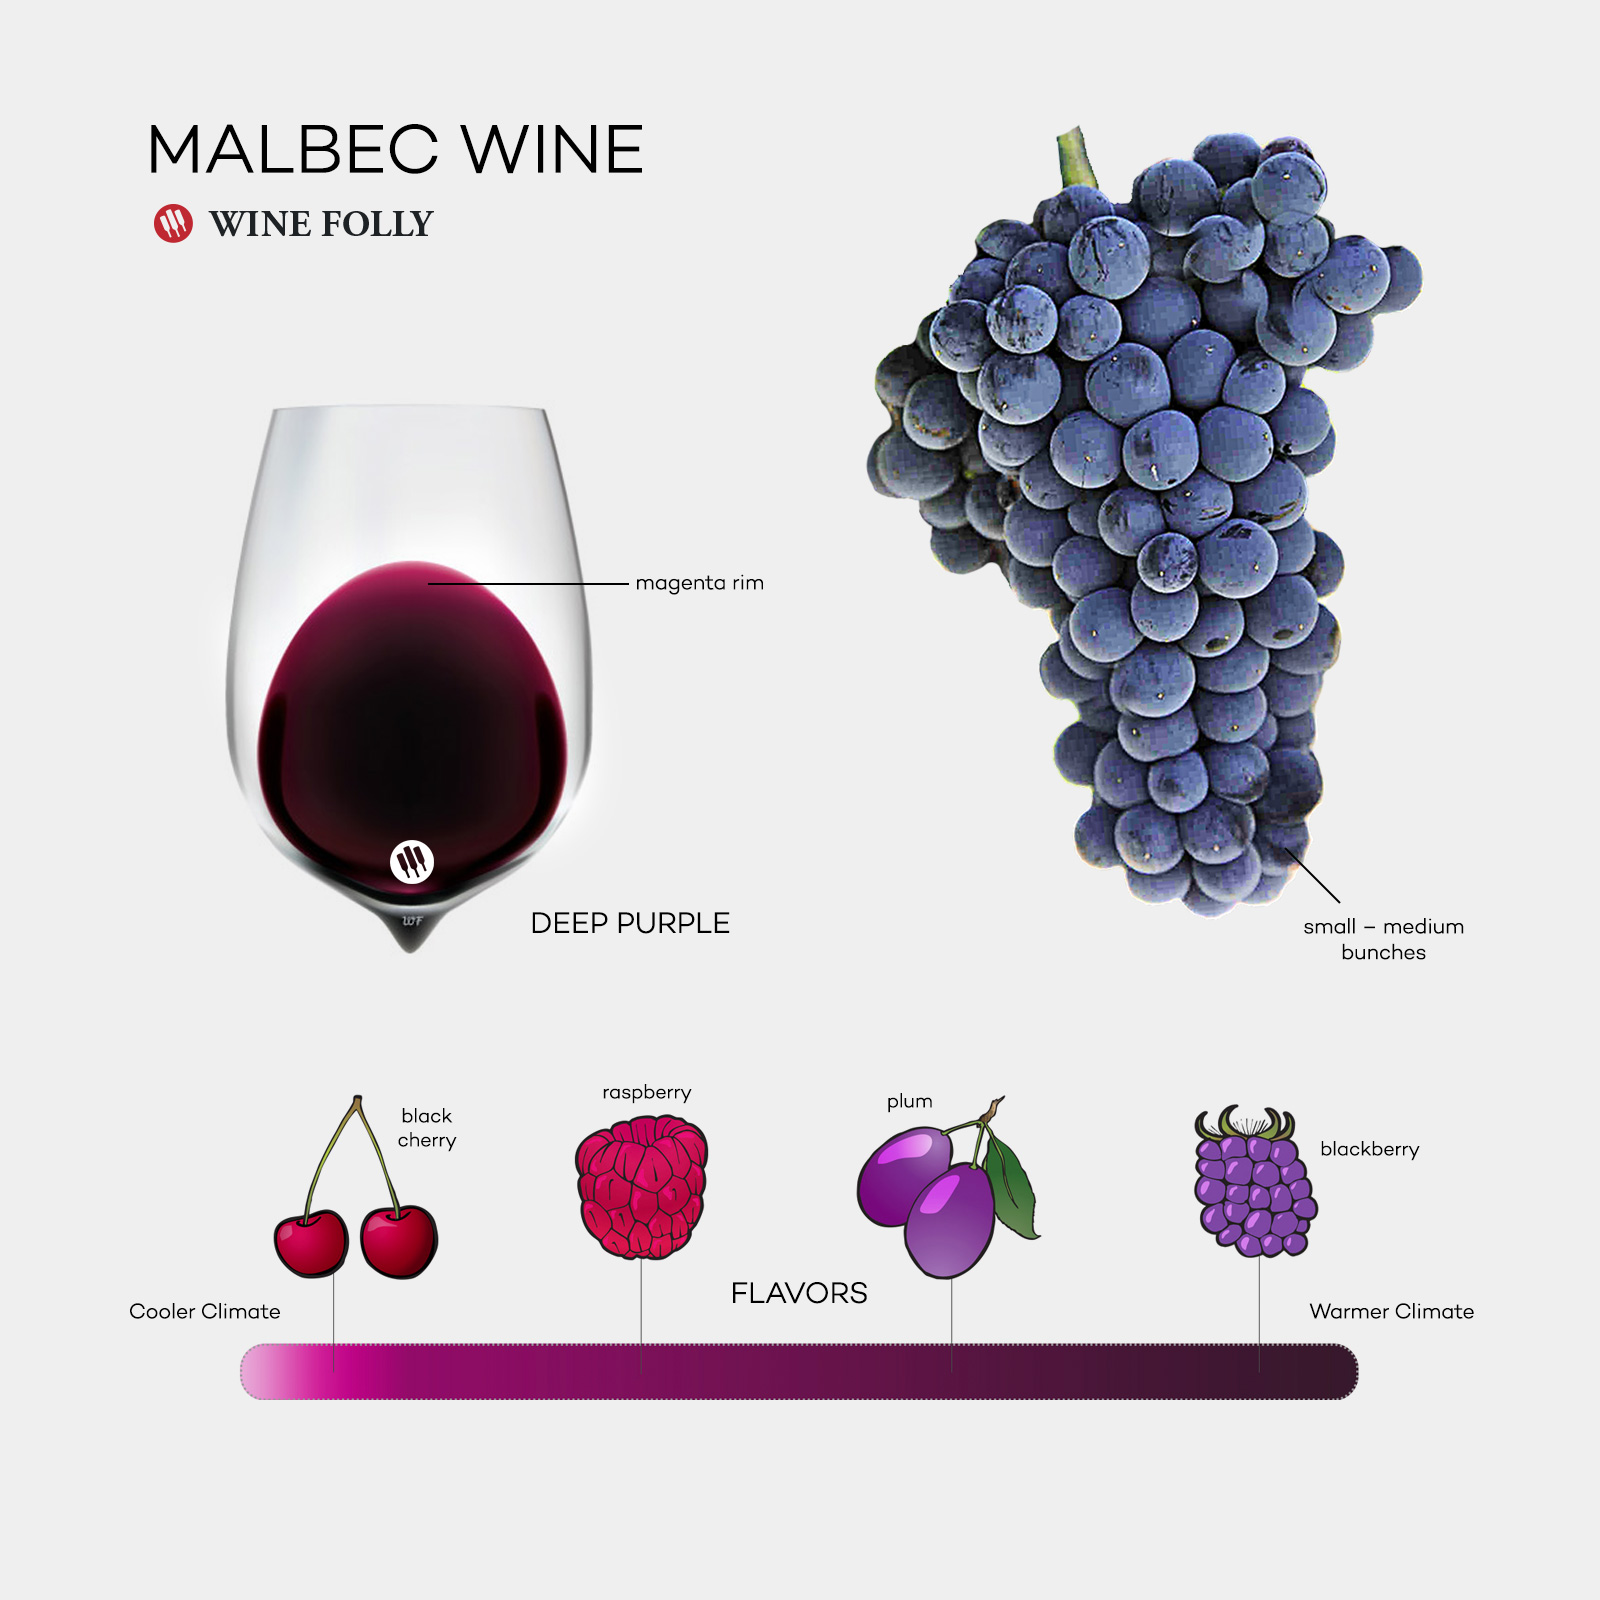 Malbec Wine 101 infographic by Wine Folly